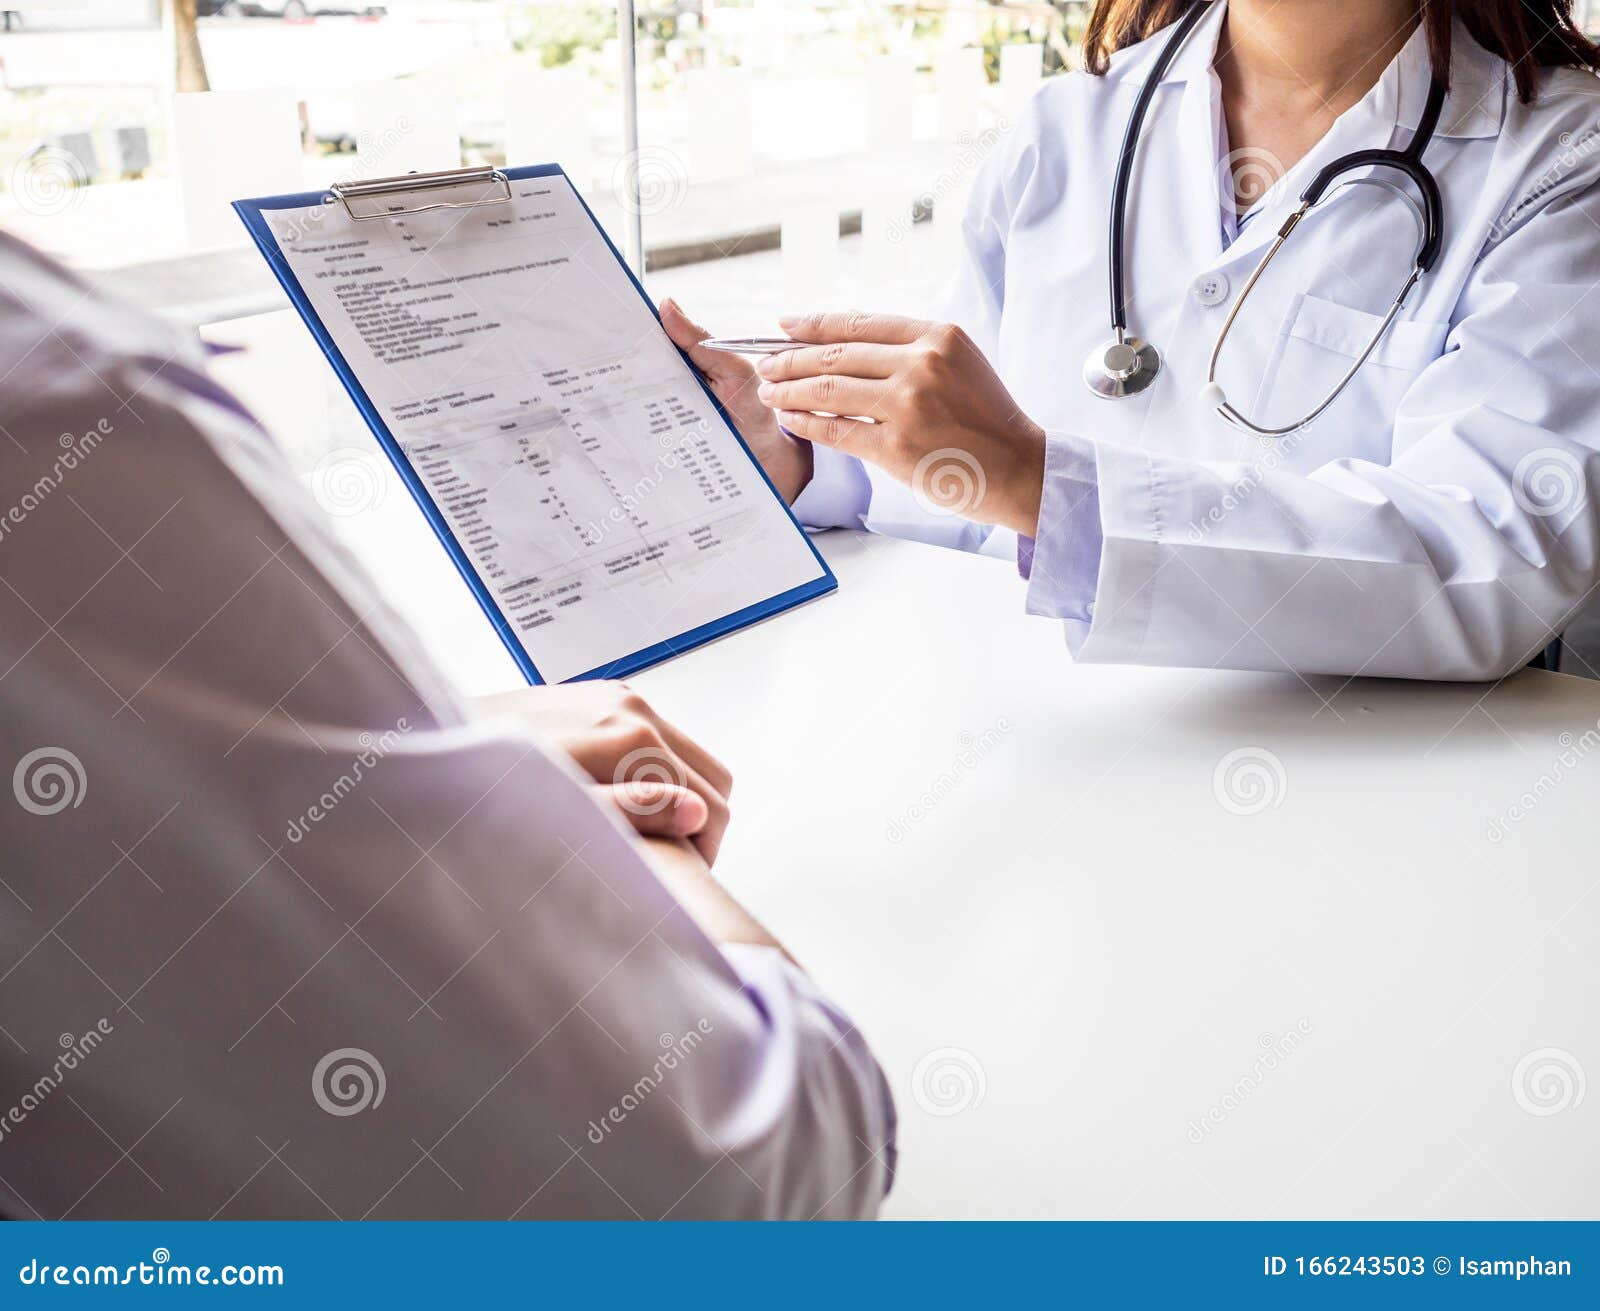 the doctor explained the health examination results to the patient